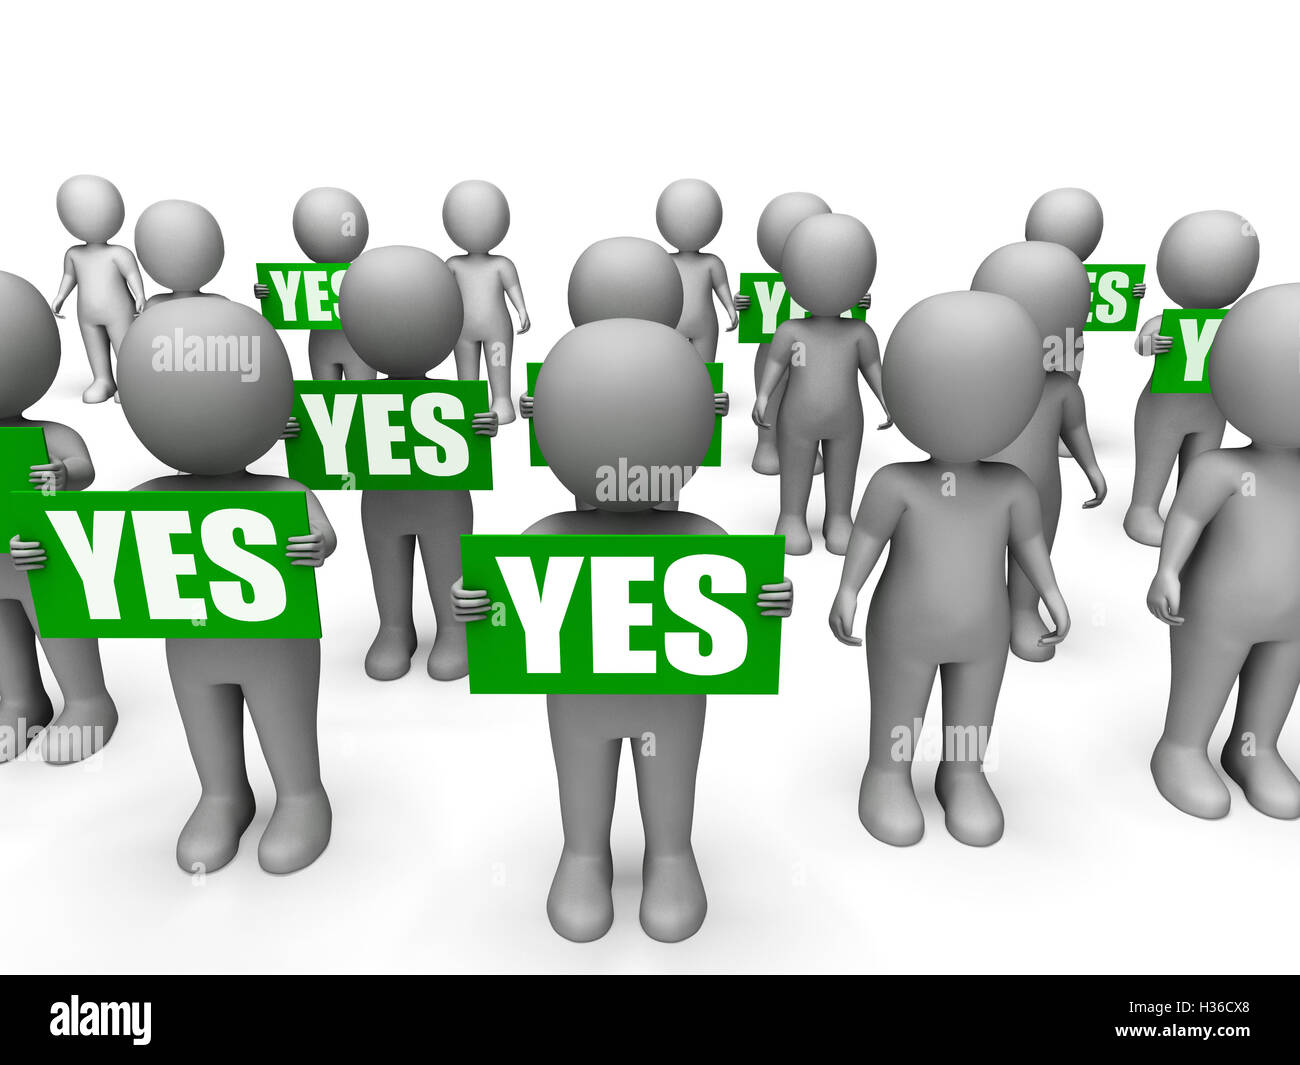 Characters Holding Yes Signs Mean Positivity And Satisfaction Stock Photo